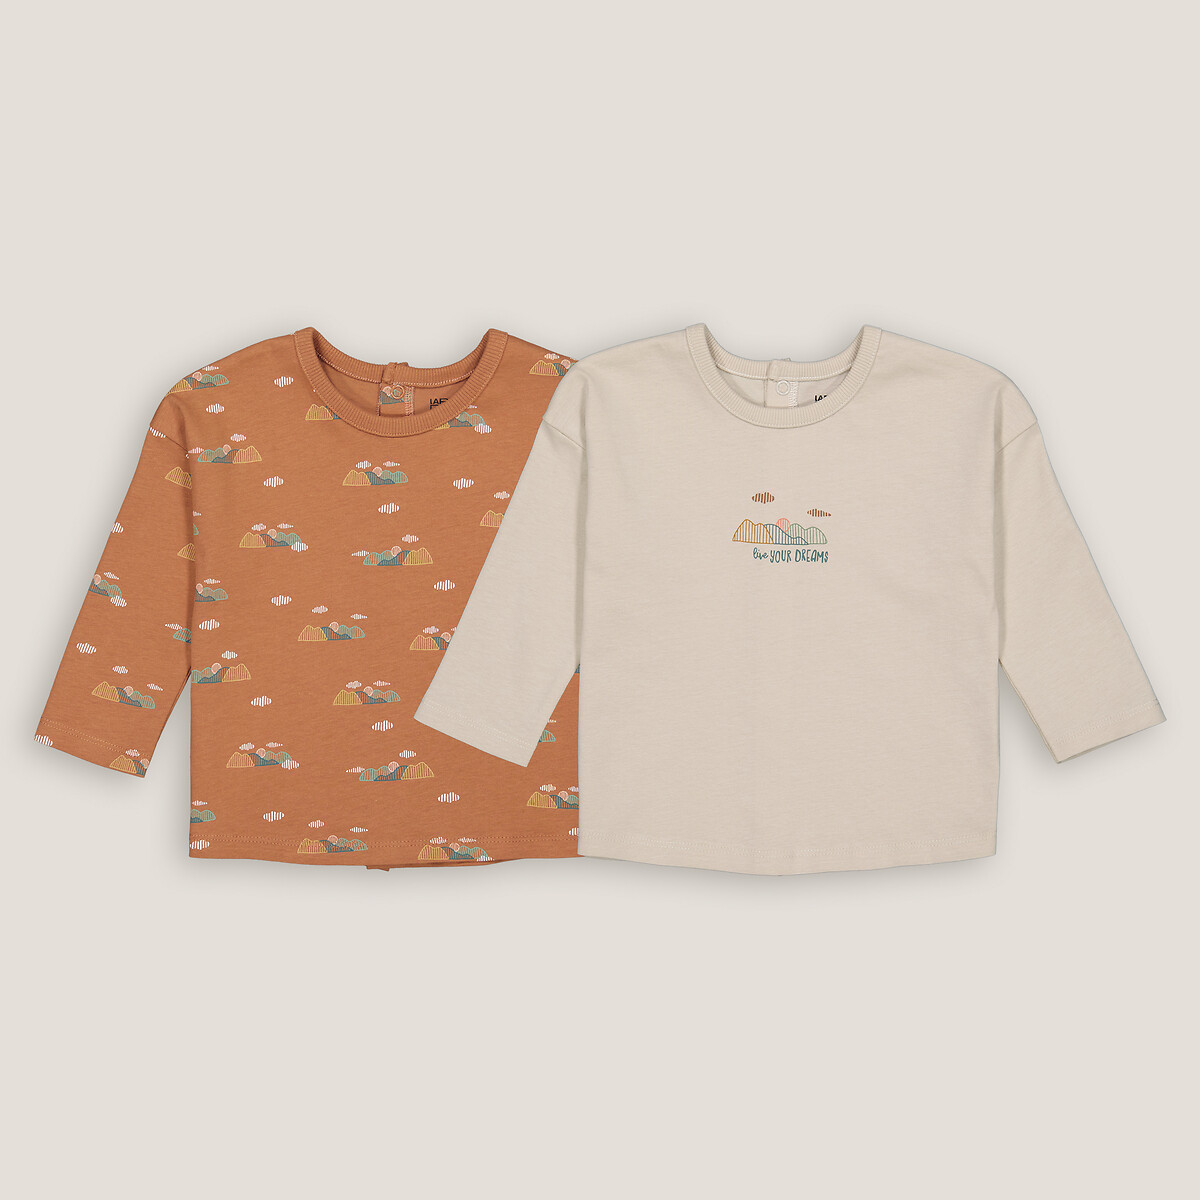 Pack of 2 T-Shirts in Mountain Print Cotton with Long Sleeves